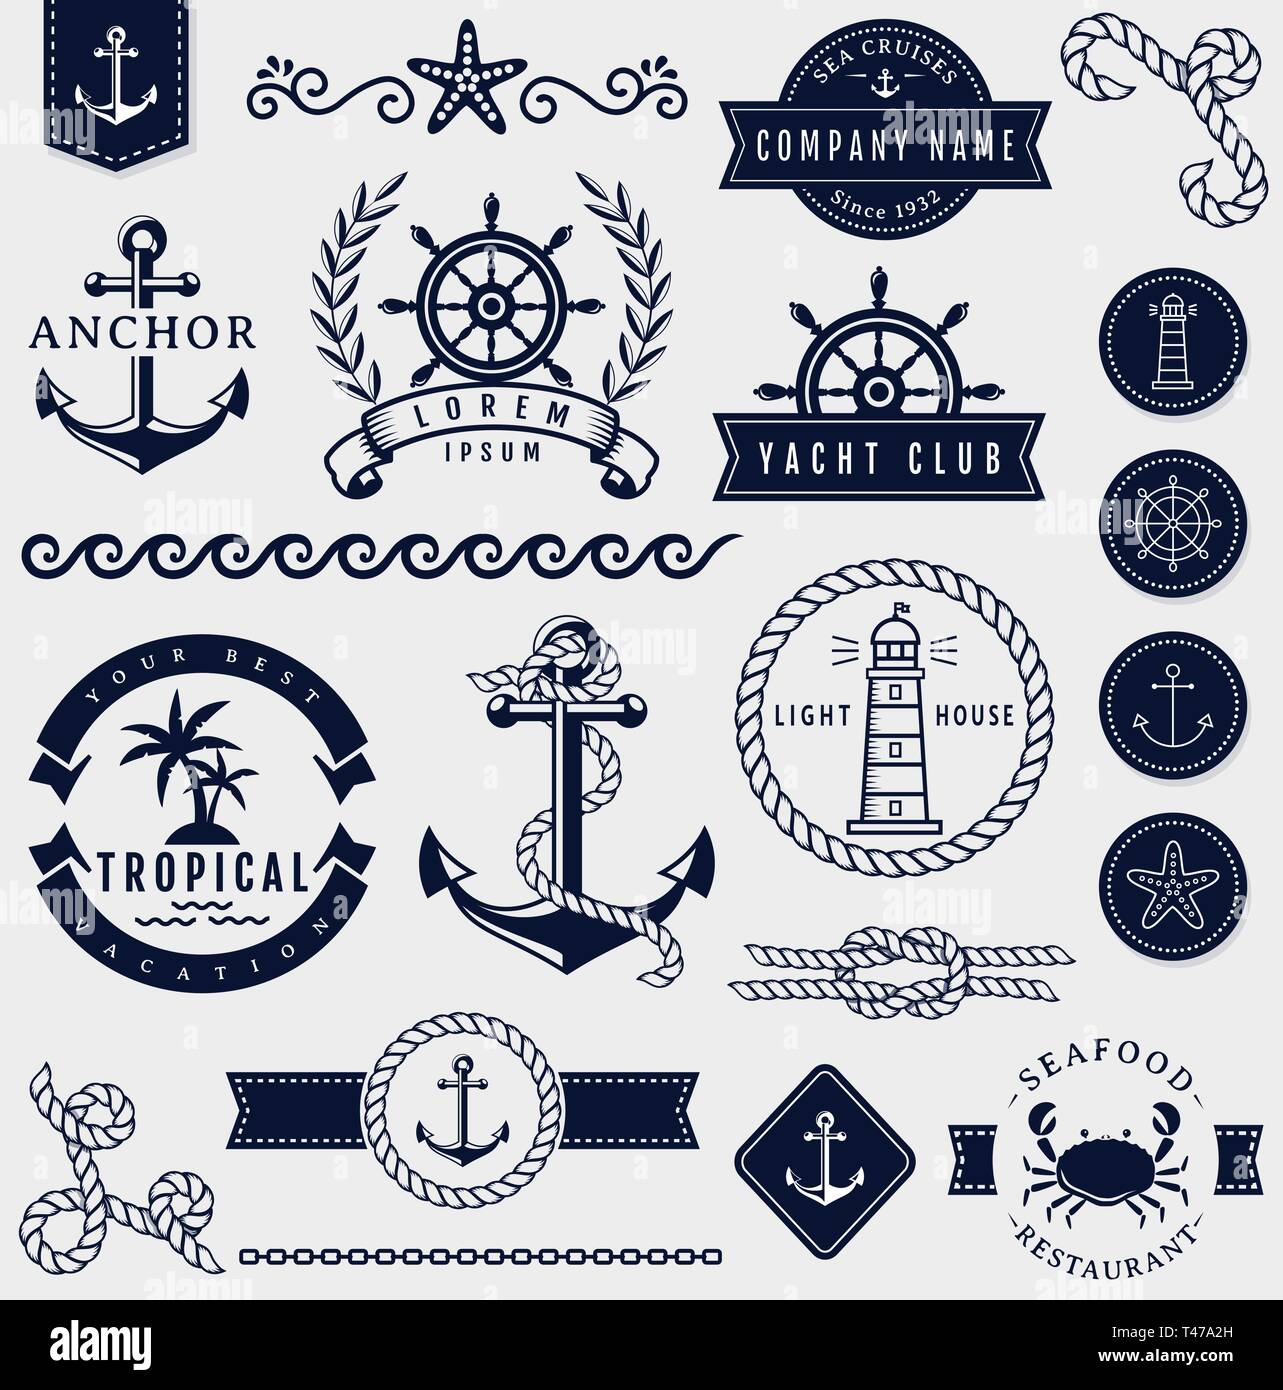 Sea and nautical decorations isolated on white background. Collection of elements for company logos, identity, print products, page and web design. Stock Vector